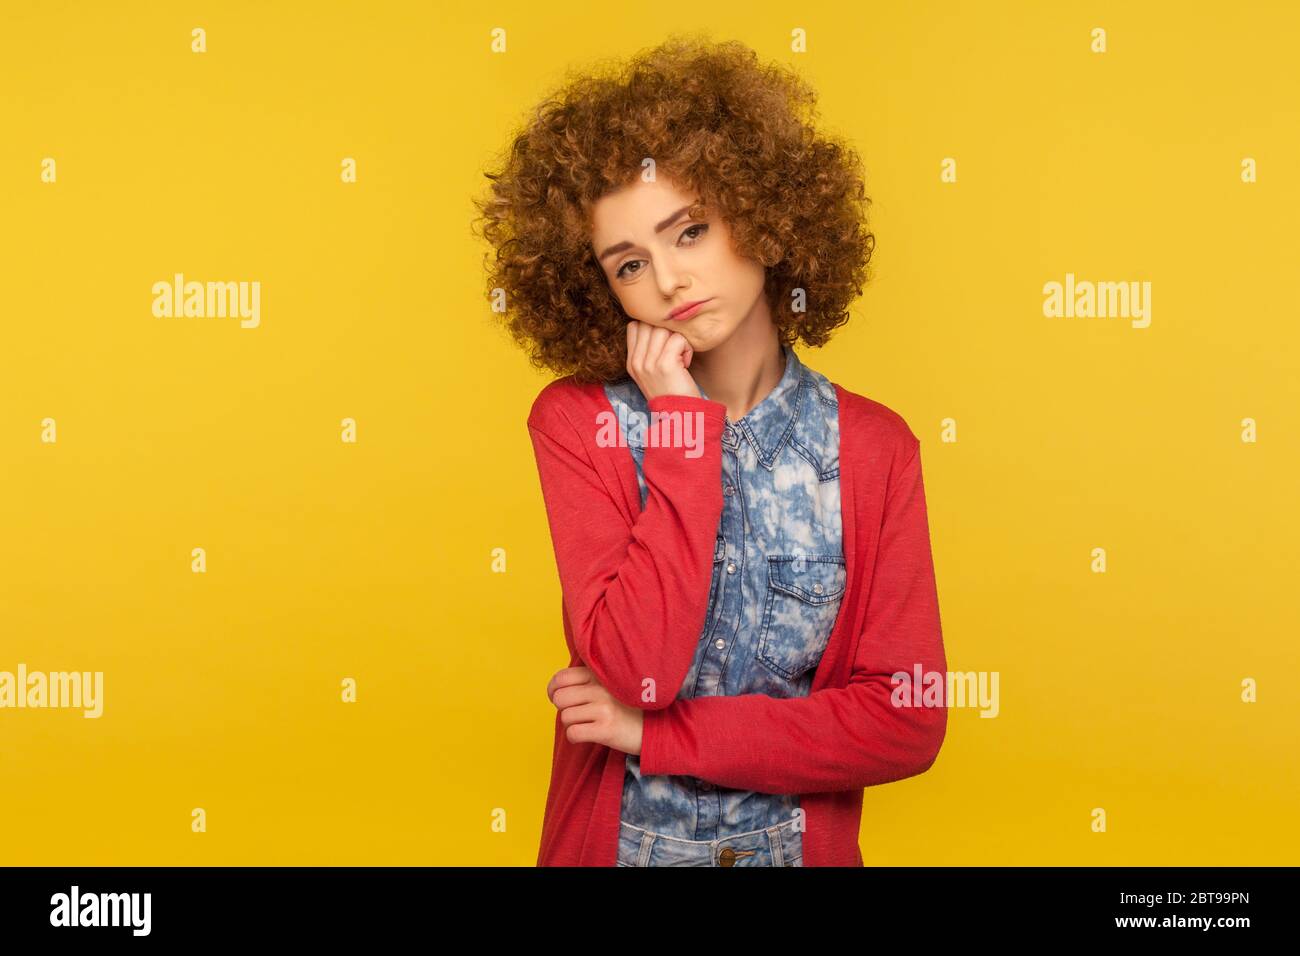 Bored tired lazy woman with curly hair leaning on hand and looking at camera with apathetic indifferent expression, listening boring conversation. ind Stock Photo